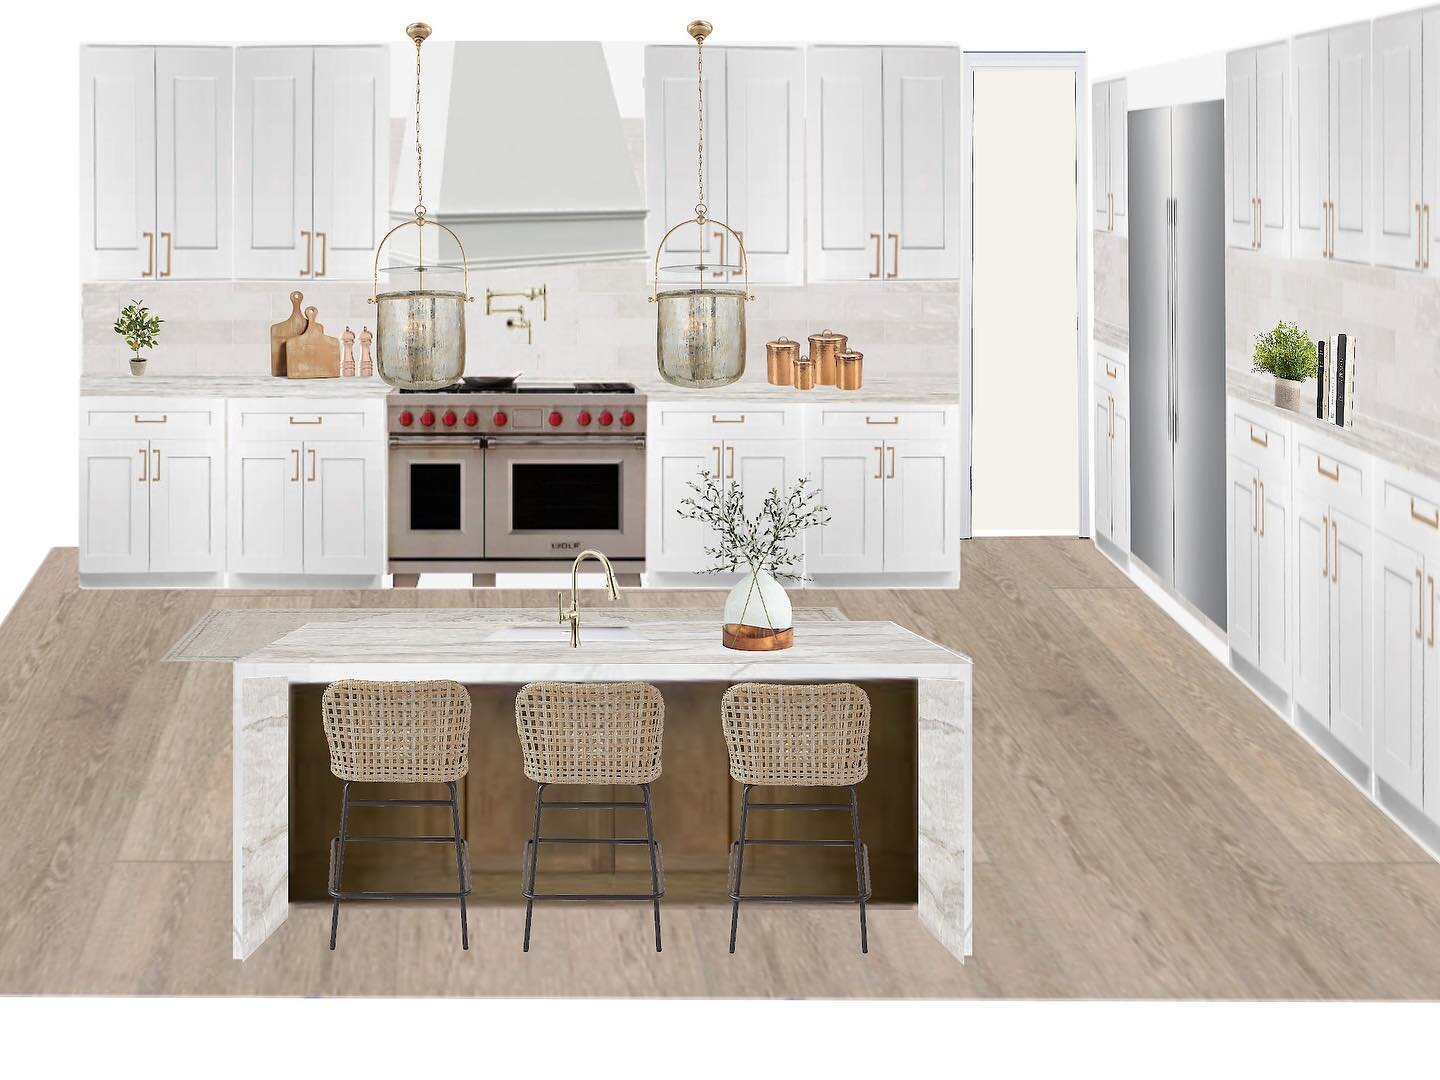 With the end of the year approaching and a new year before us one thing I love to do is start with a fresh kitchen. 

My design team has been nailing the kitchen designs lately and I can see it only getting better in the new year! If you are thinking